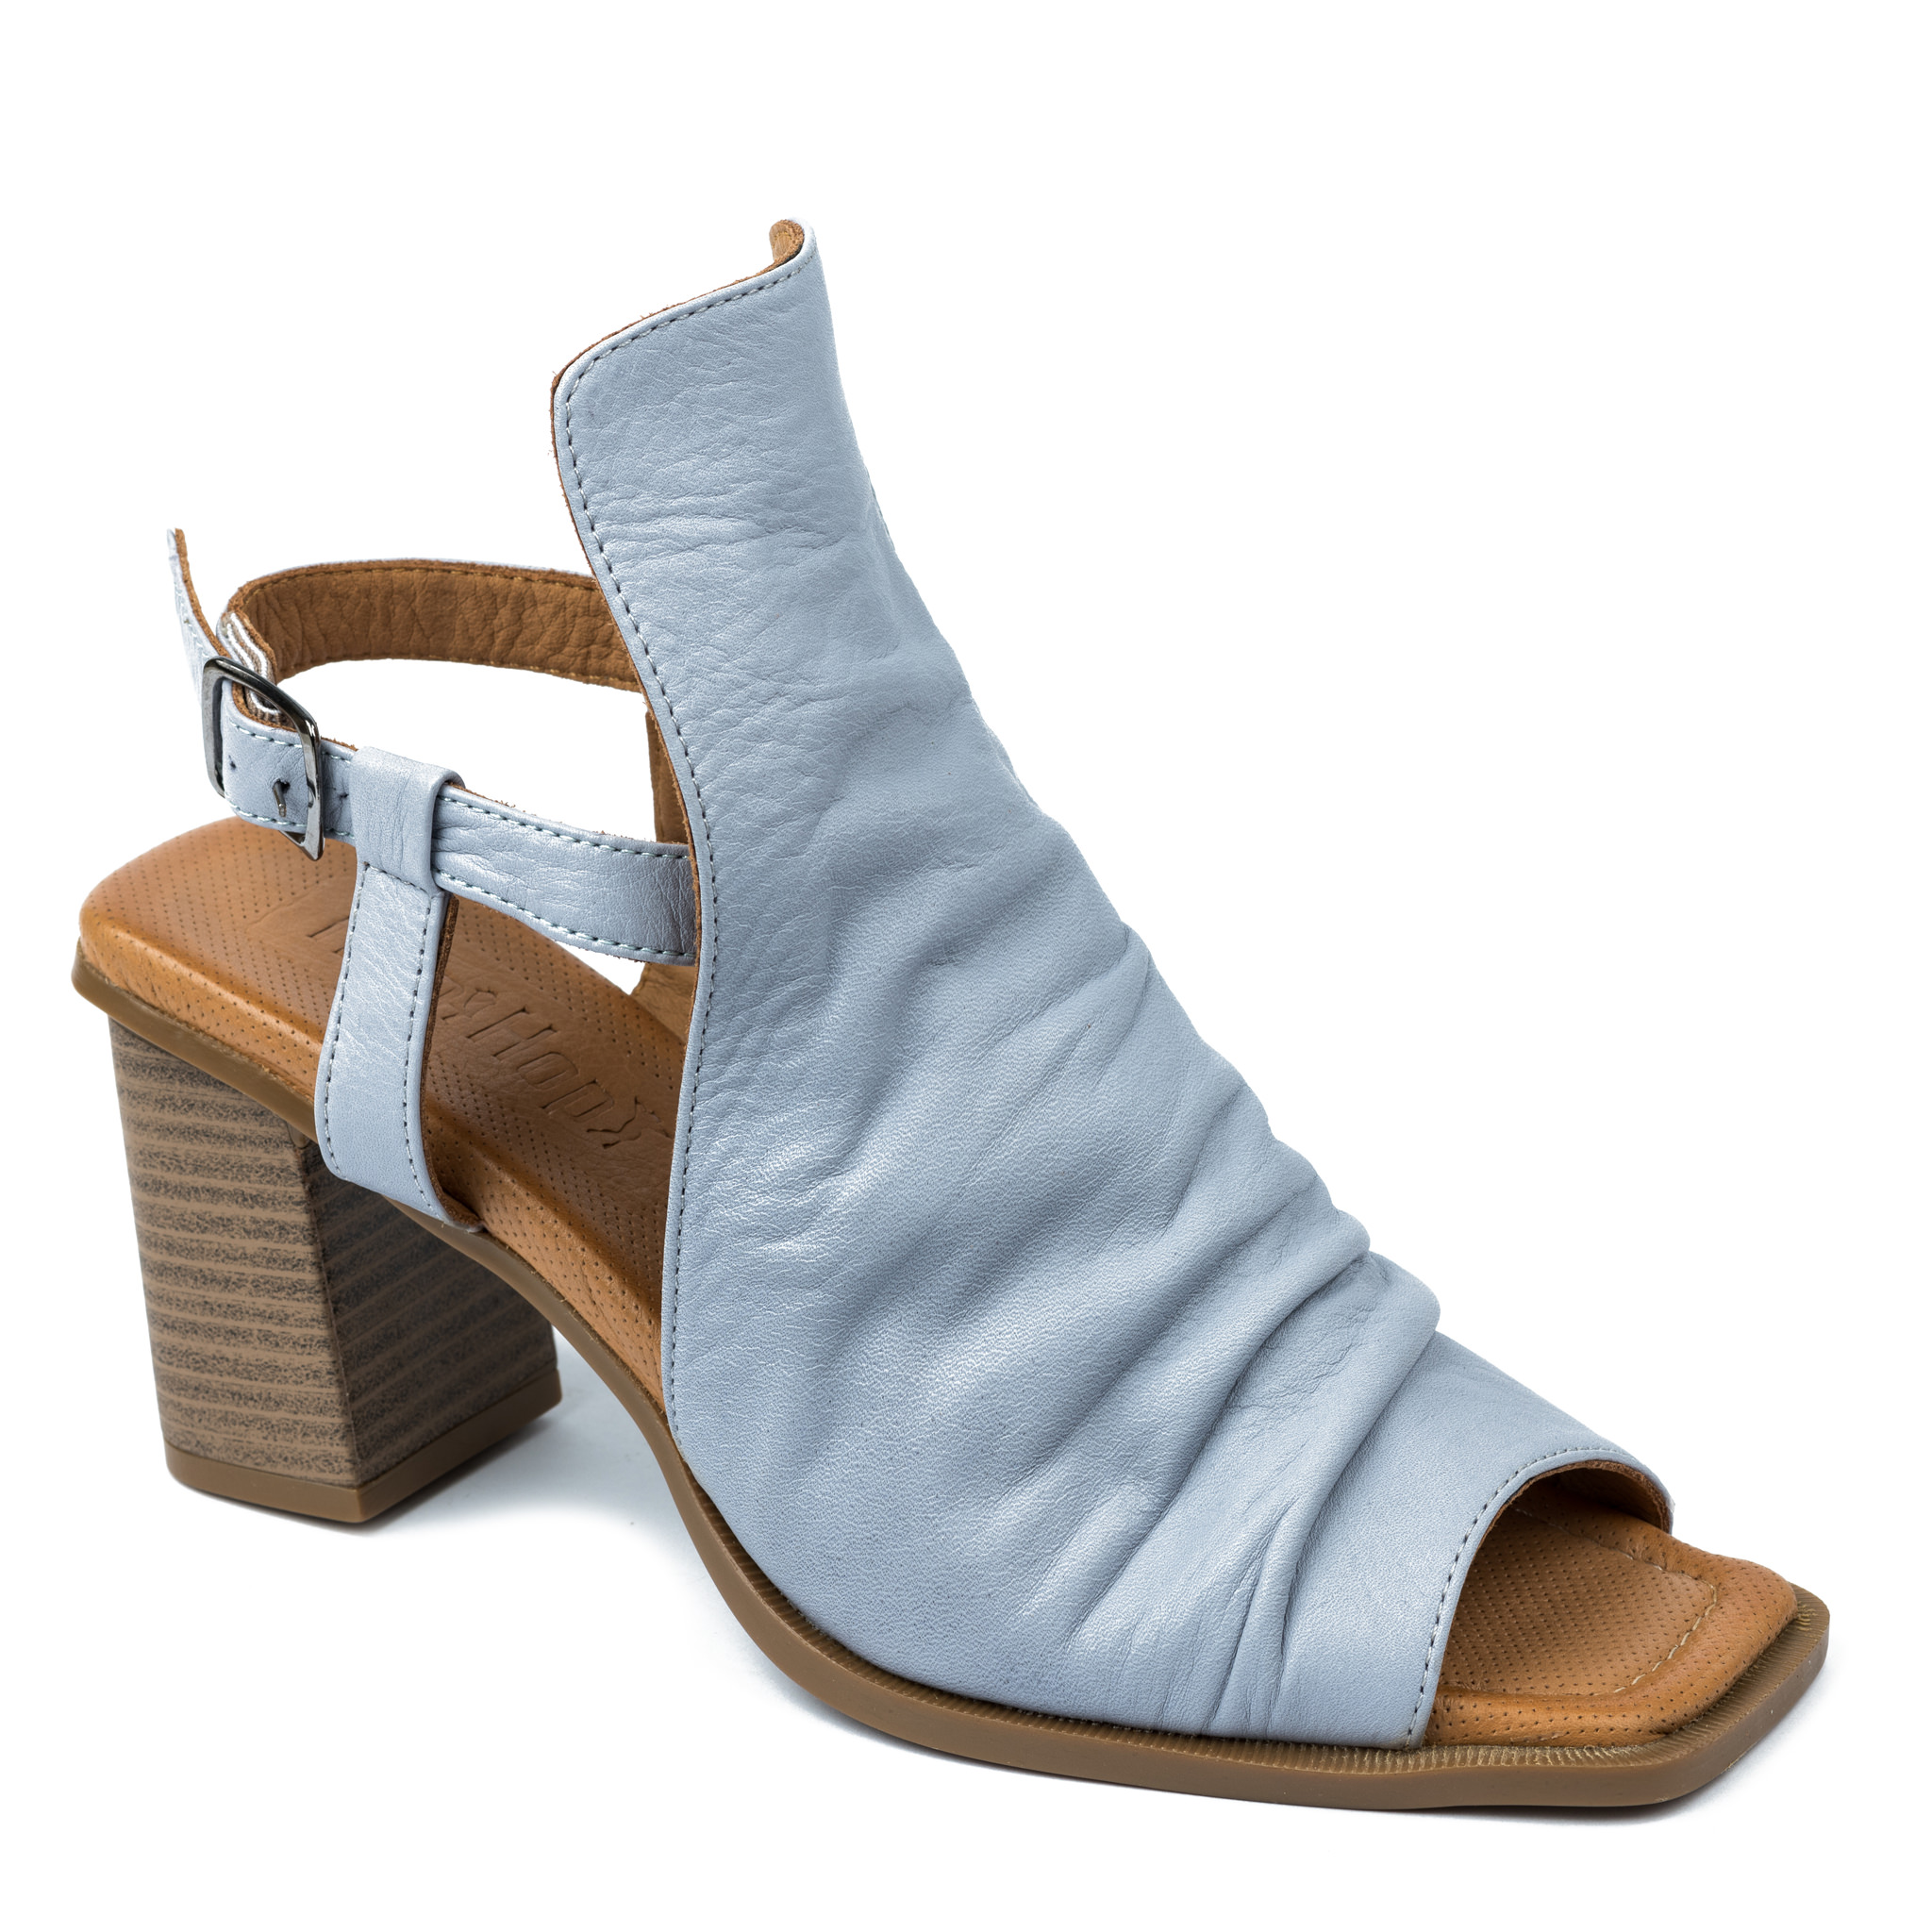 Leather sandals A710 - BLUE